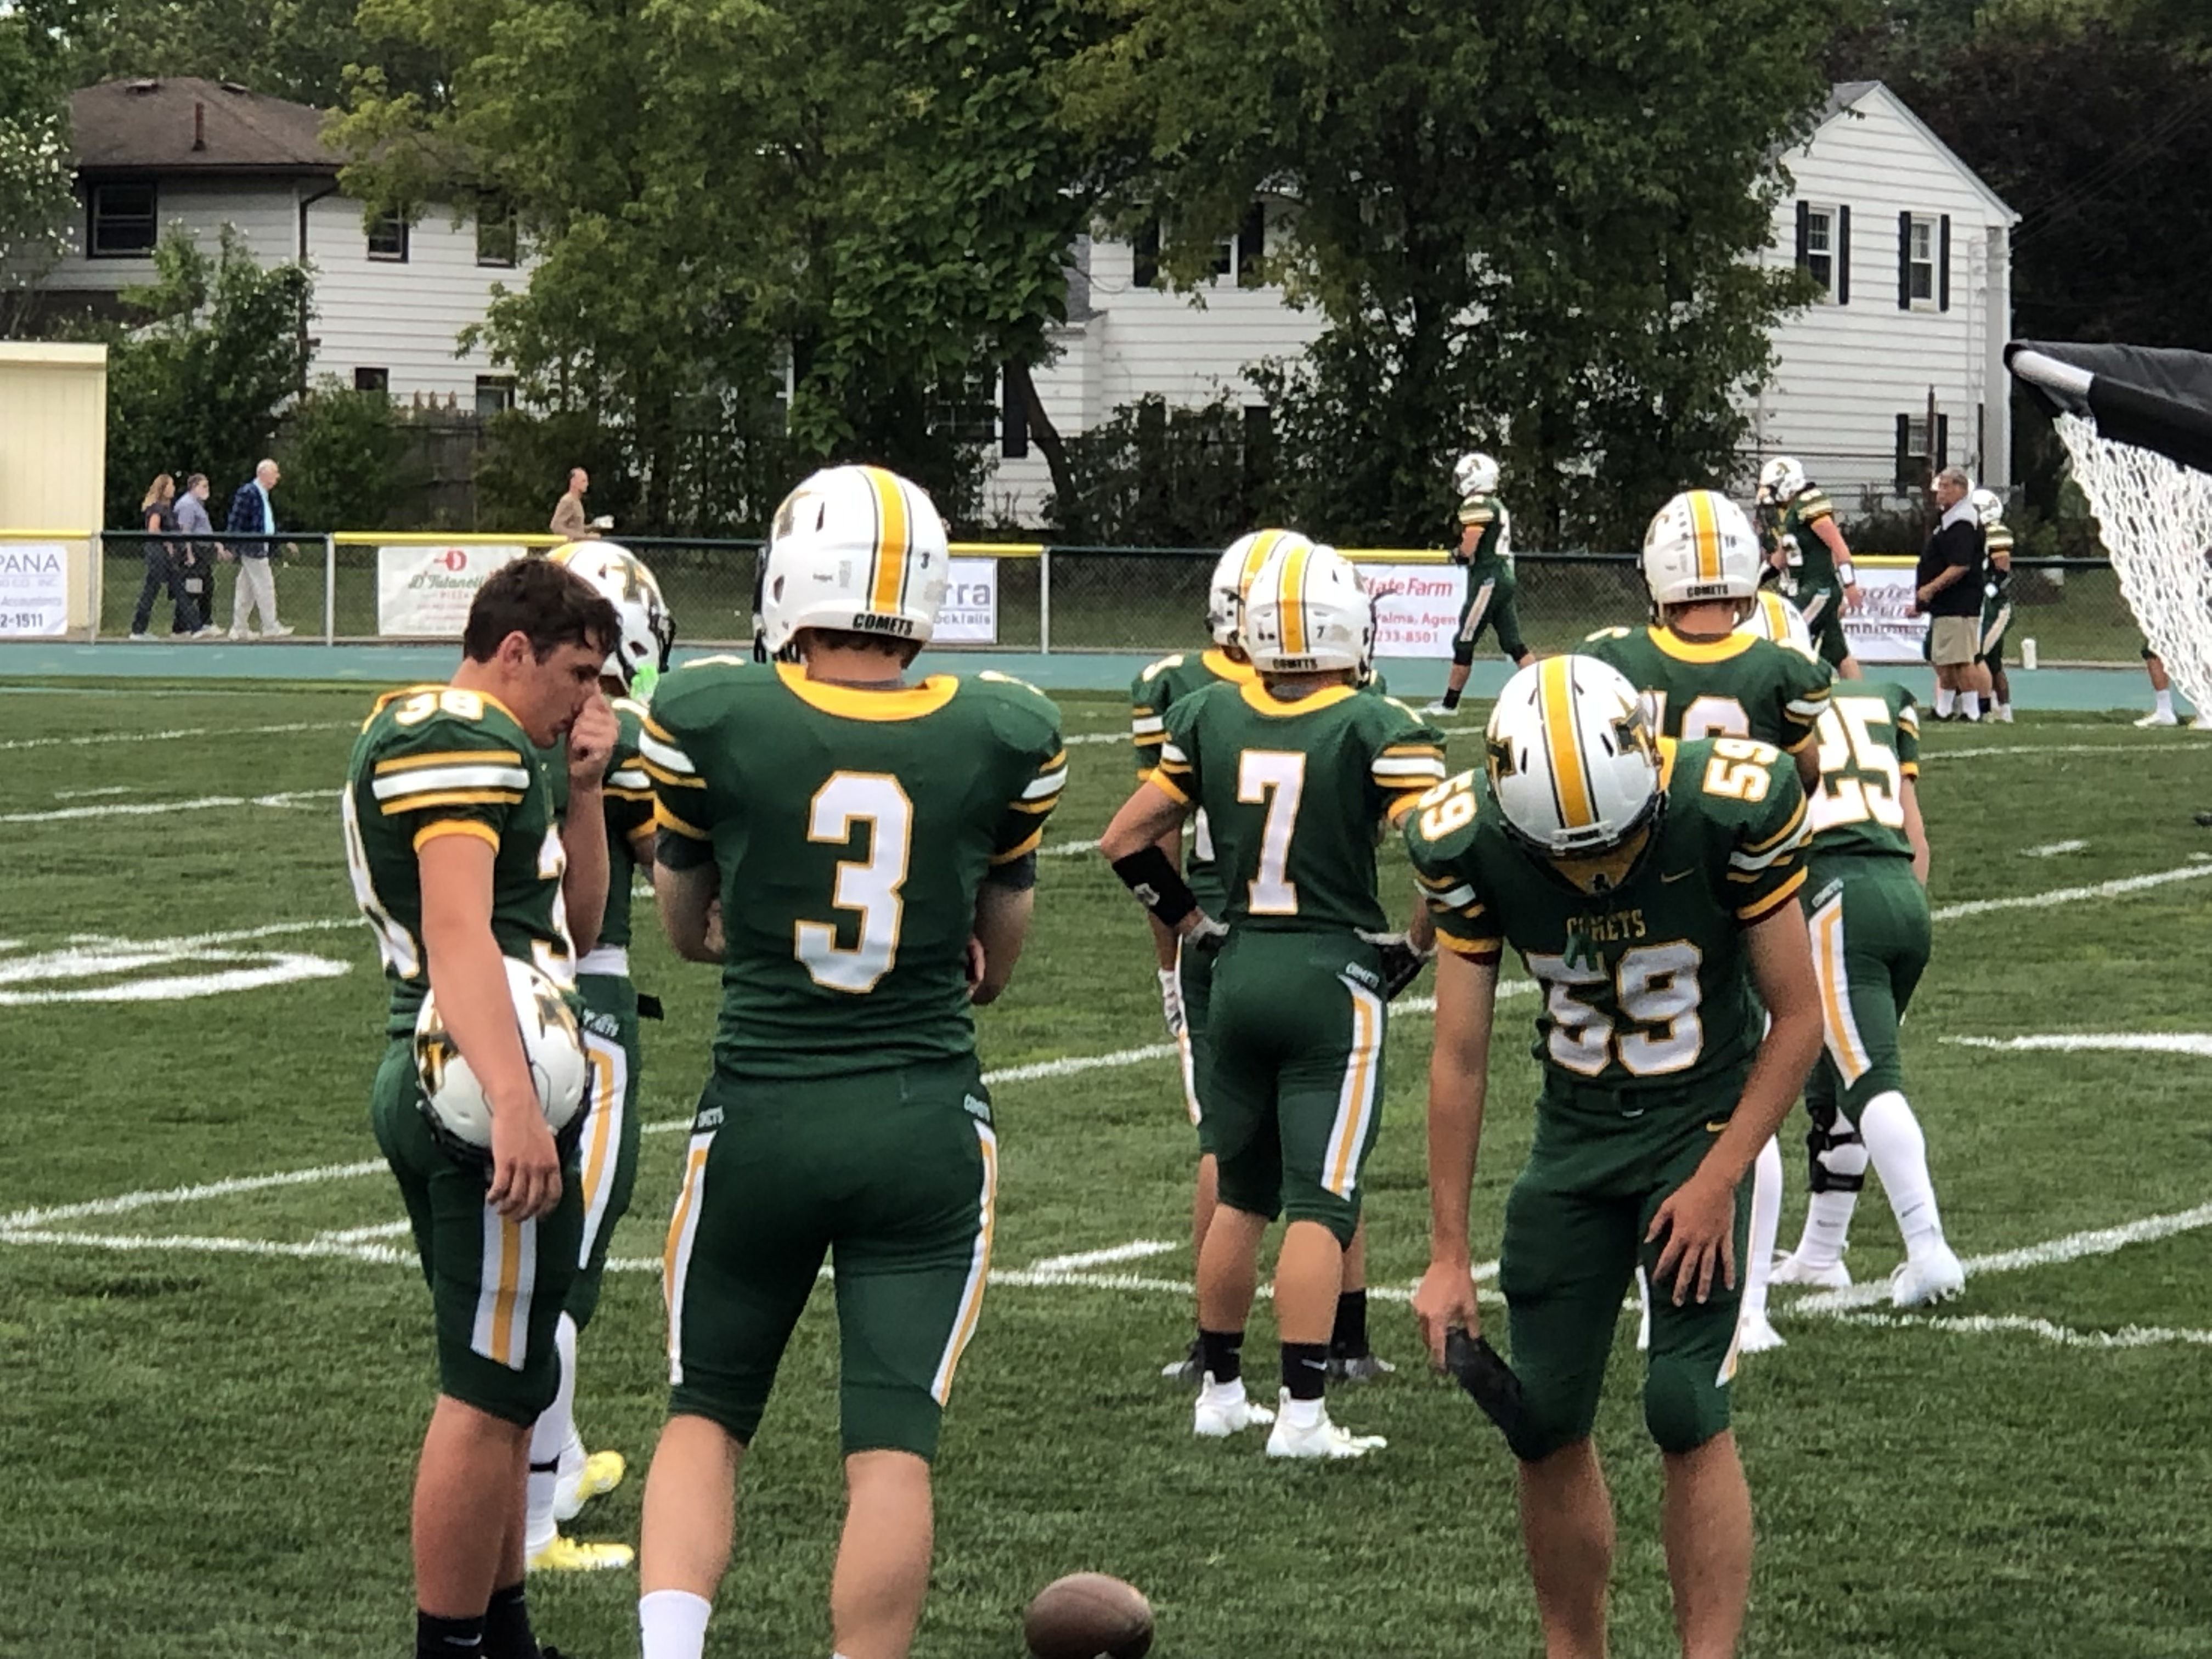 Amherst Comets Move to 2-0 Following 41-0 Shutout of the Firelands Falcons